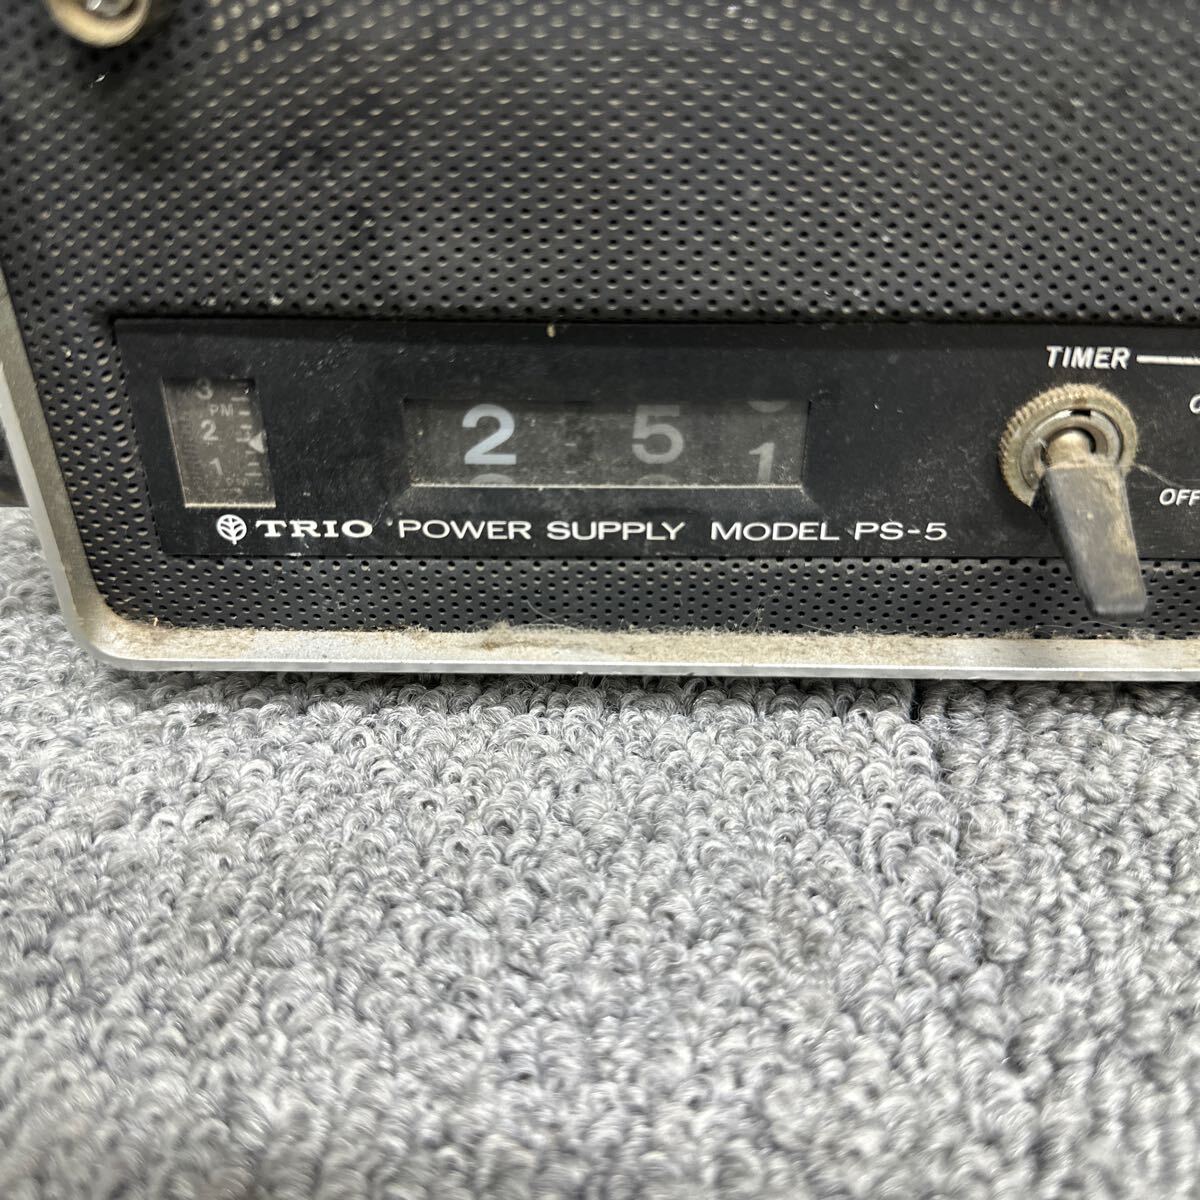 MYM5-61 super-discount TORIO PS-5 POWER SUPPLY Trio power supply transceiver stabilizing supply electrification OK used present condition goods *3 times re-exhibition . liquidation 